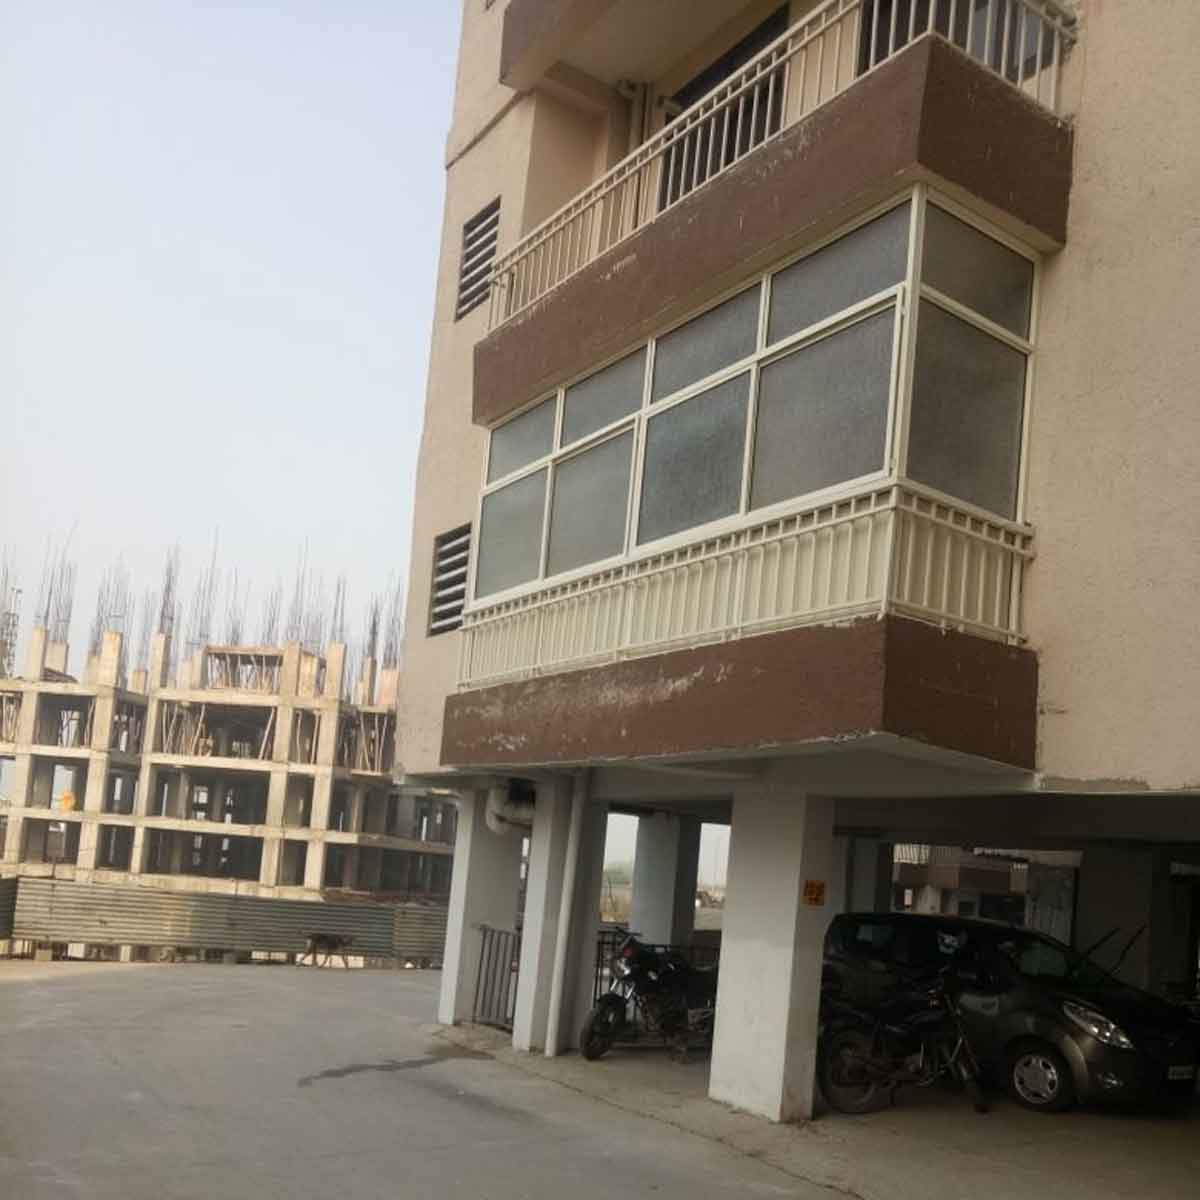 UPVC Aluminium Balcony Covering Manufacturers, Suppliers in Hisar